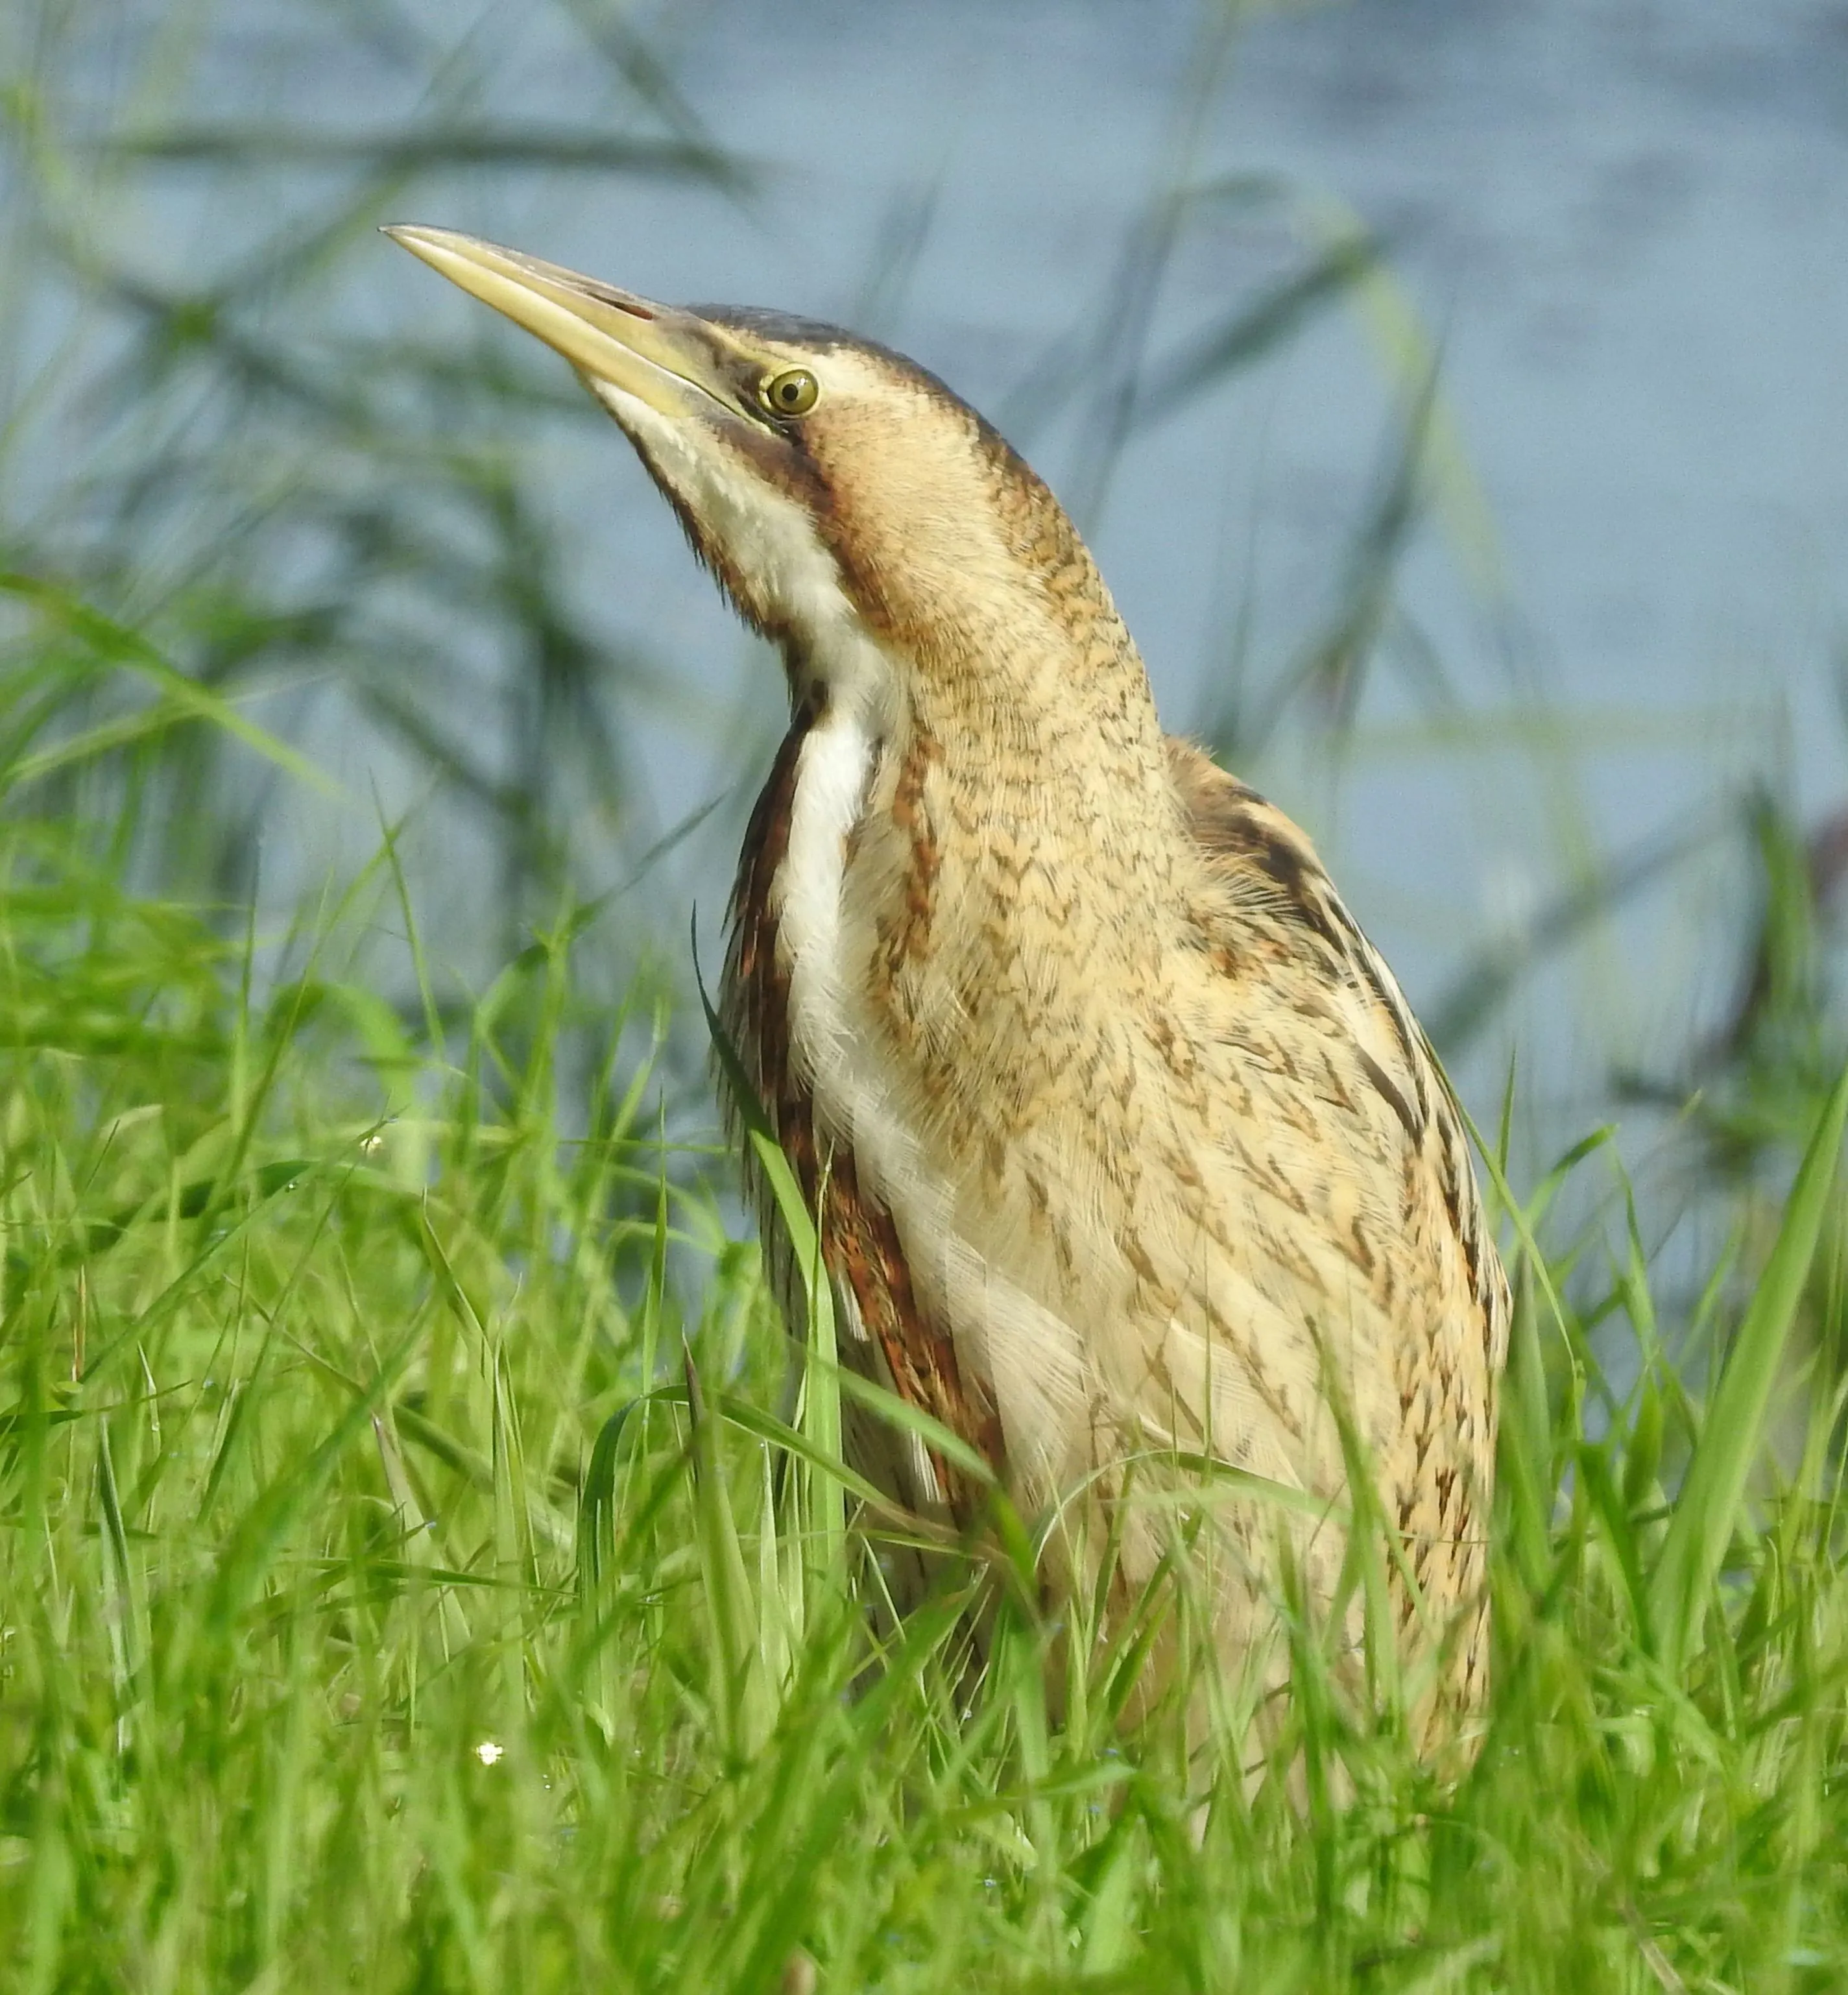 Side profile of a Bittern in the grass.